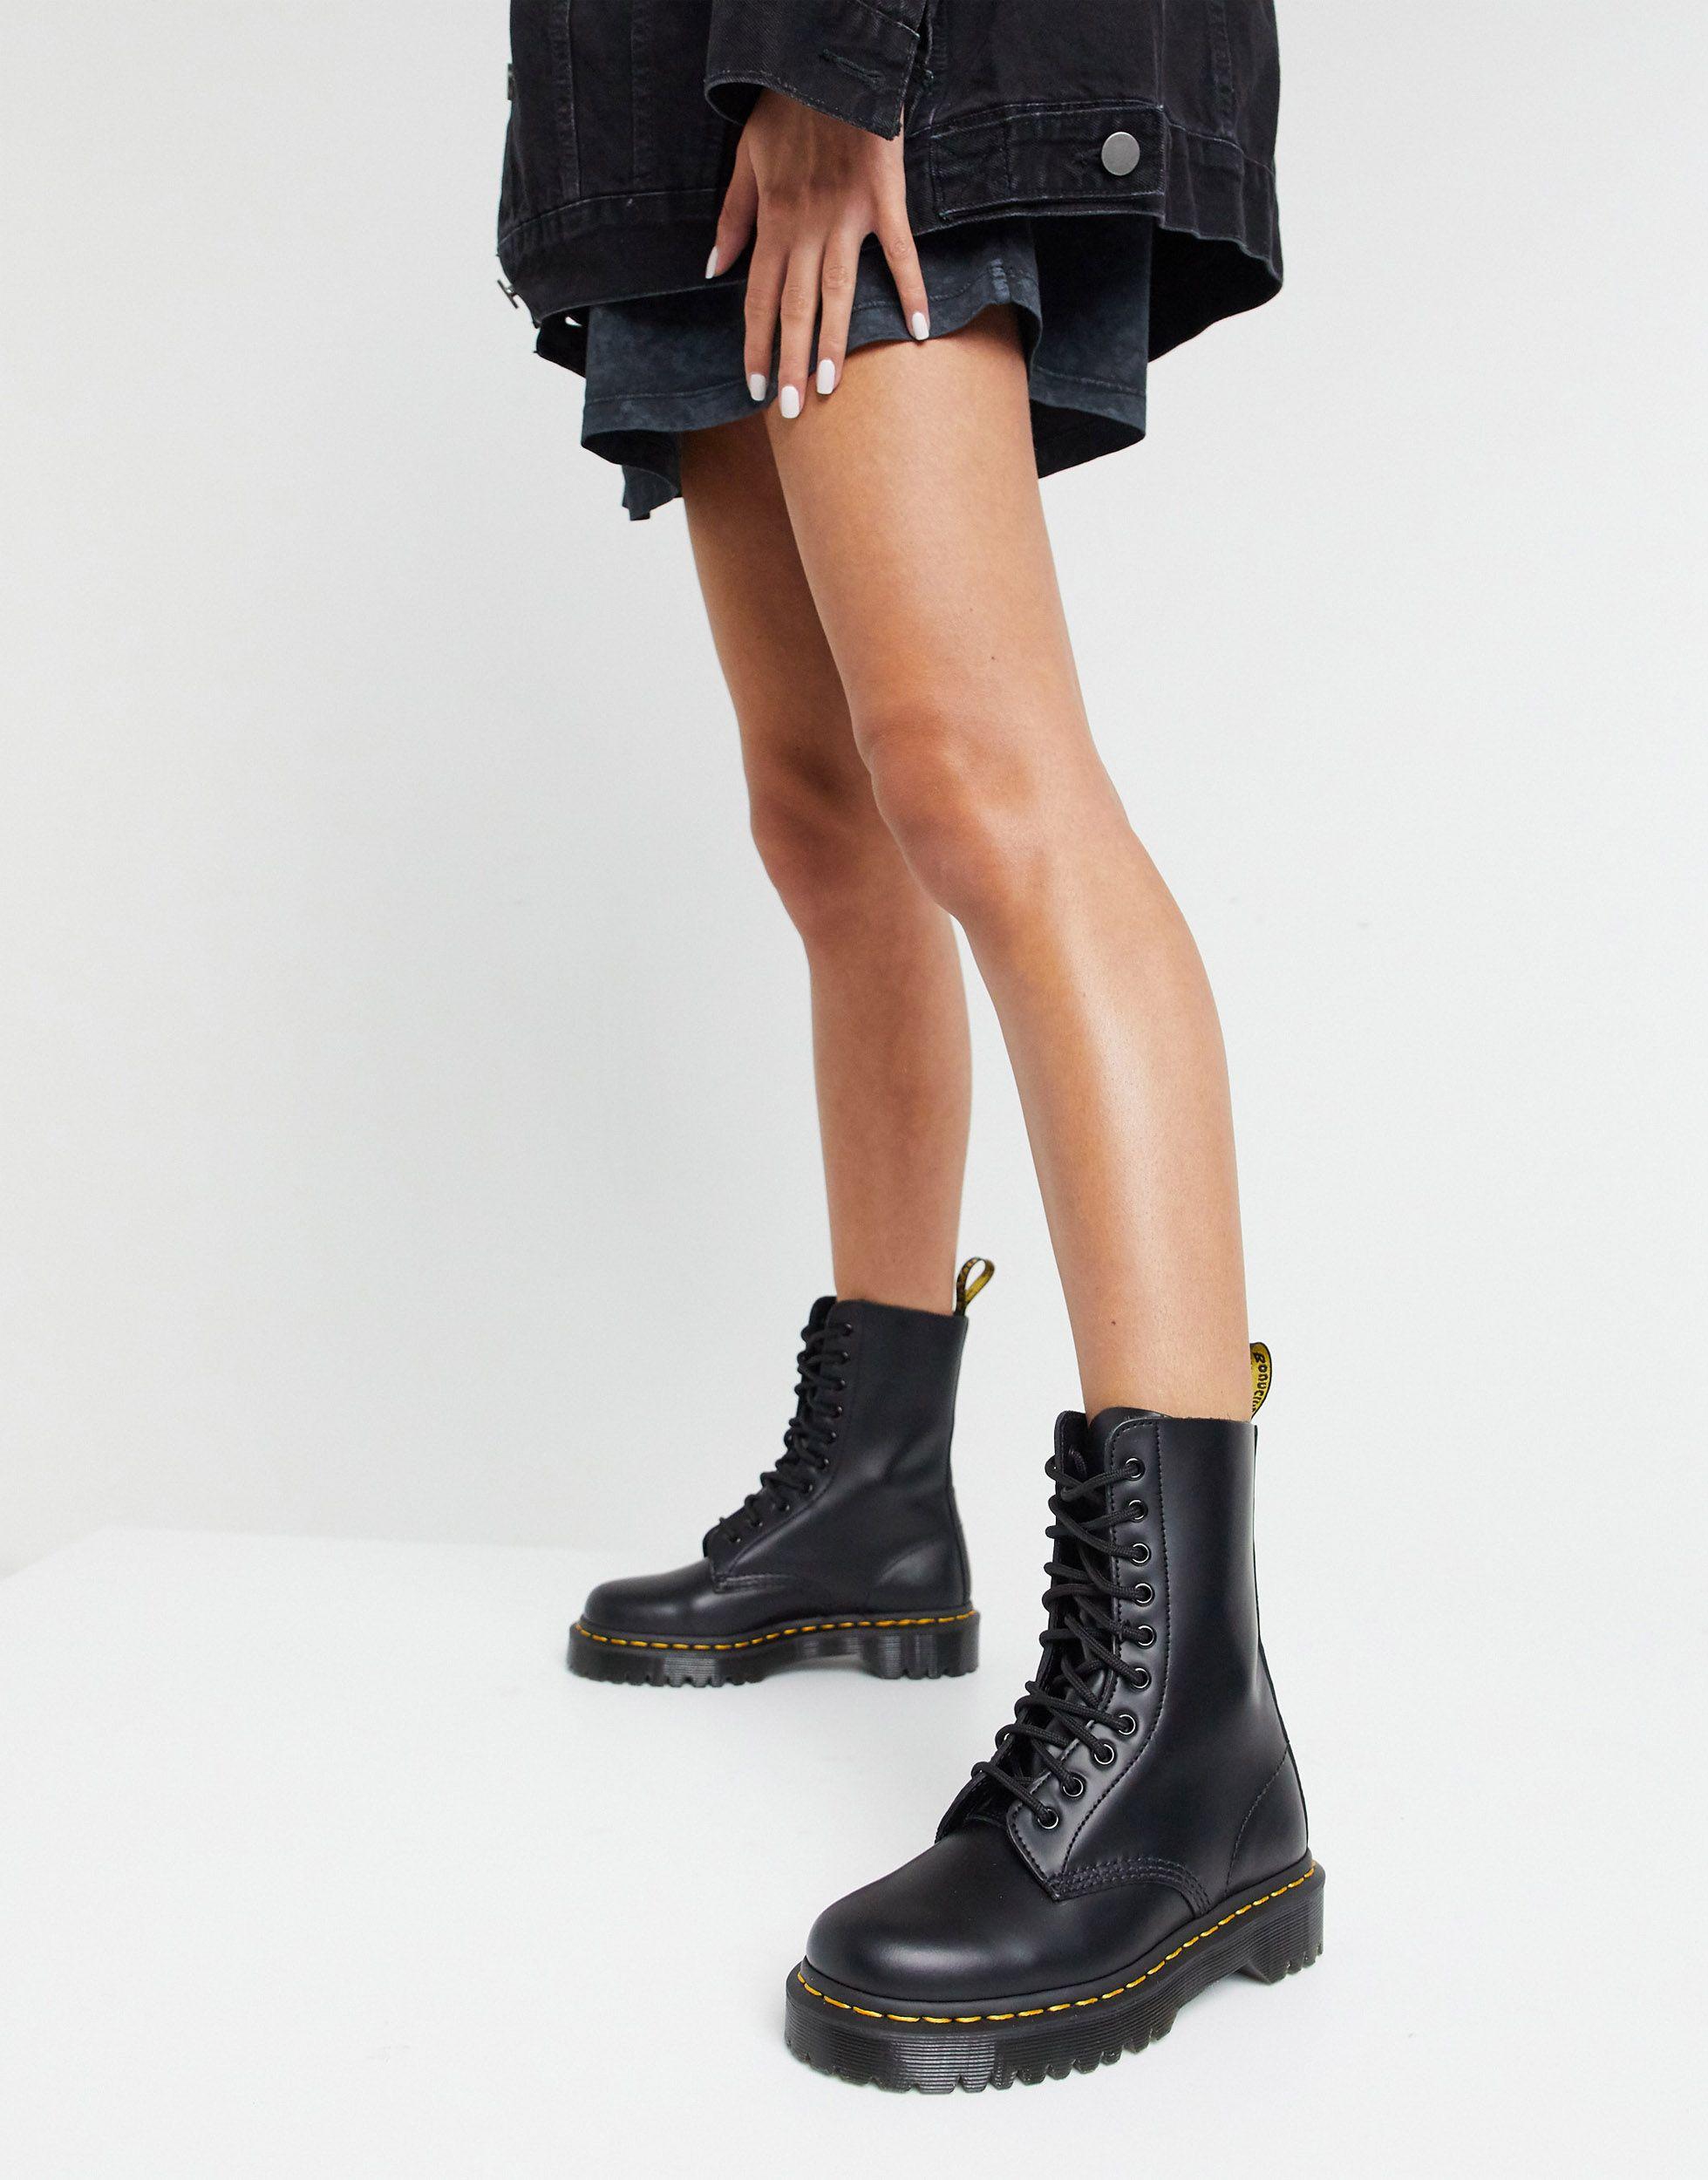 Dr. Martens 1490 10 Eye Bex Boots in Black | Lyst Canada